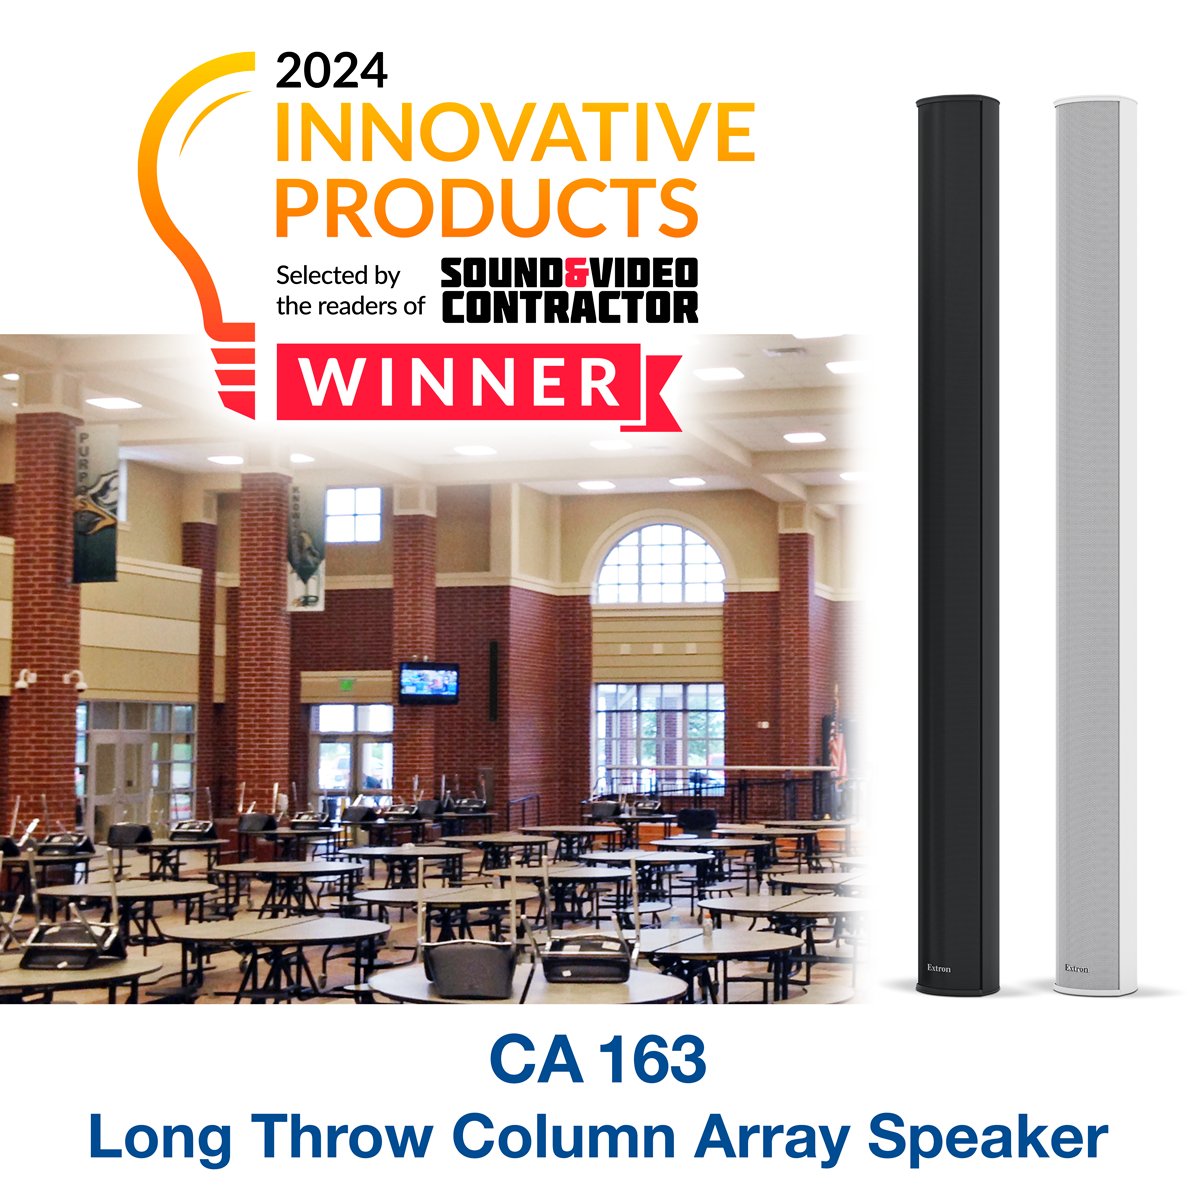 We are excited to receive a 2024 SVC Innovative Product Award for the CA 163 Long Throw Column Array Speaker, our groundbreaking speaker designed for reverberant spaces. Winning in the Installed Speakers category, we are thankful for the readers of Sound & Video Contractor who